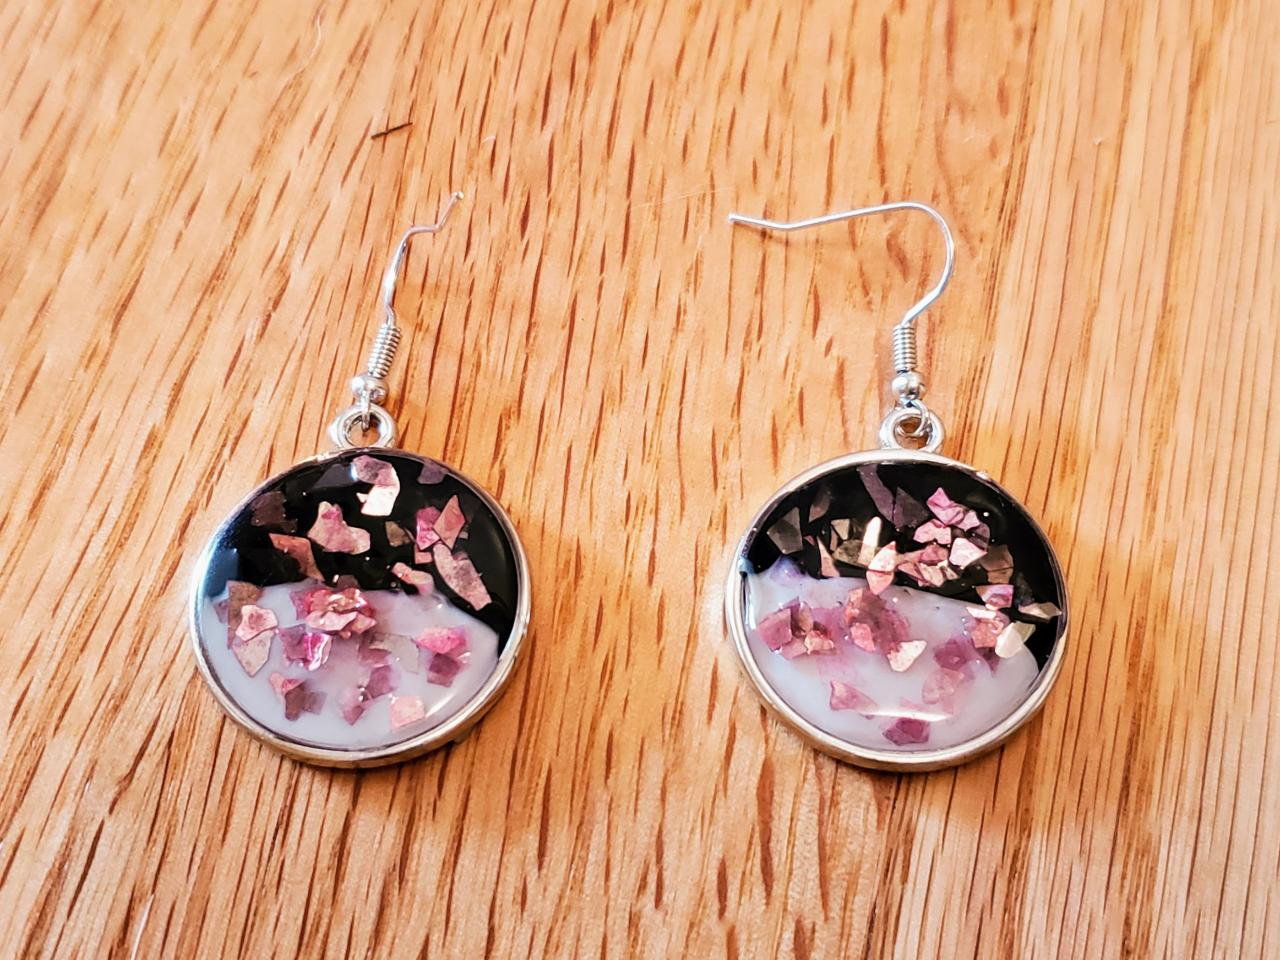 Resin Earrings Circle White Black Colorblock Pink Sparkle Glitter Women's Jewelry Gifts For Her